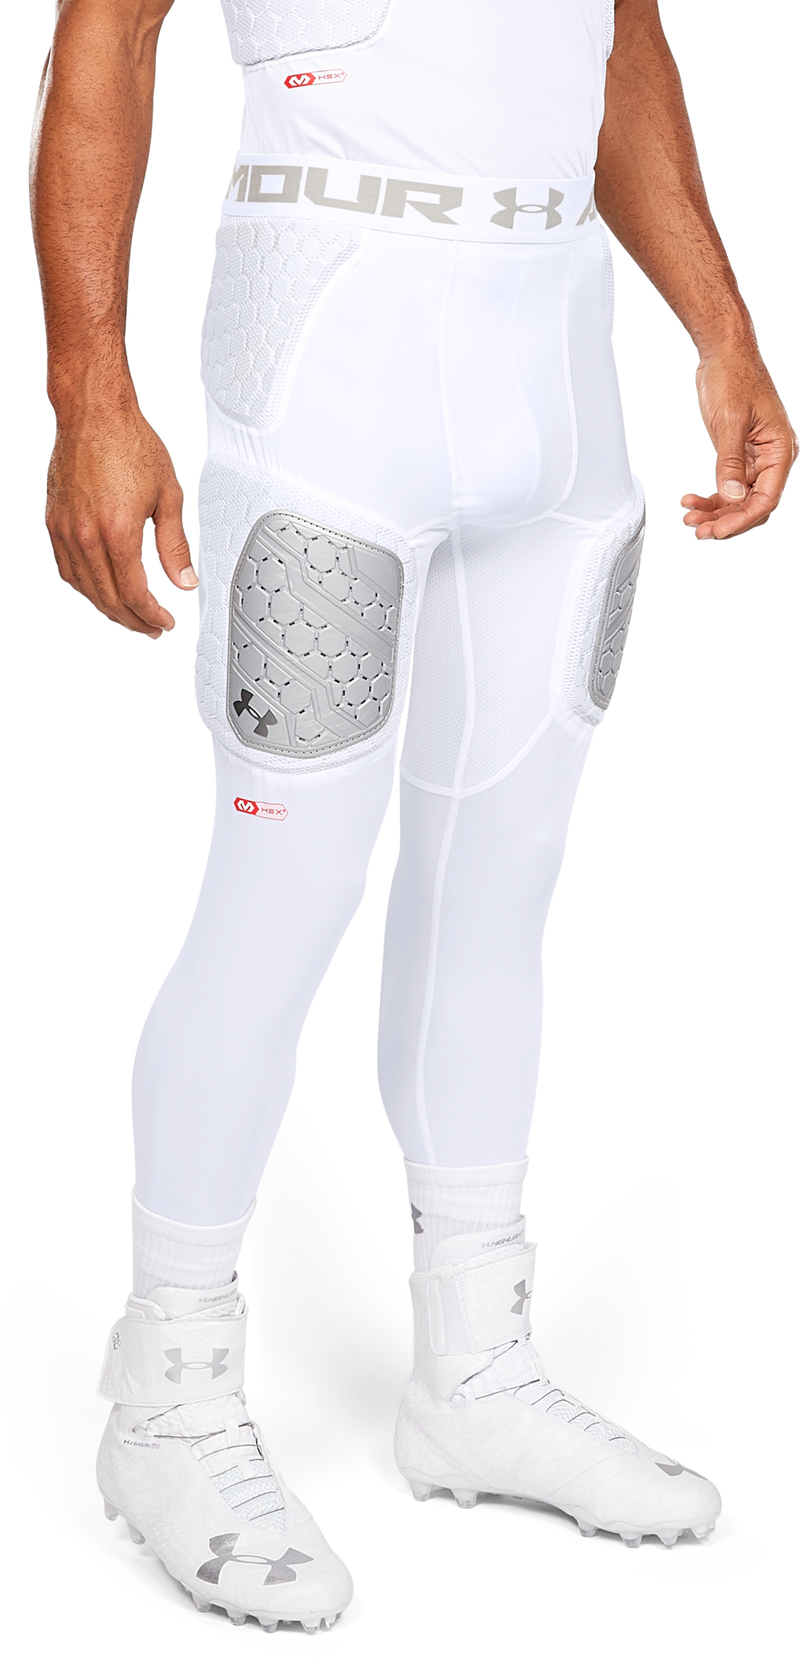 Under Armour Adult Pro 5-Pad 3/4 Tight